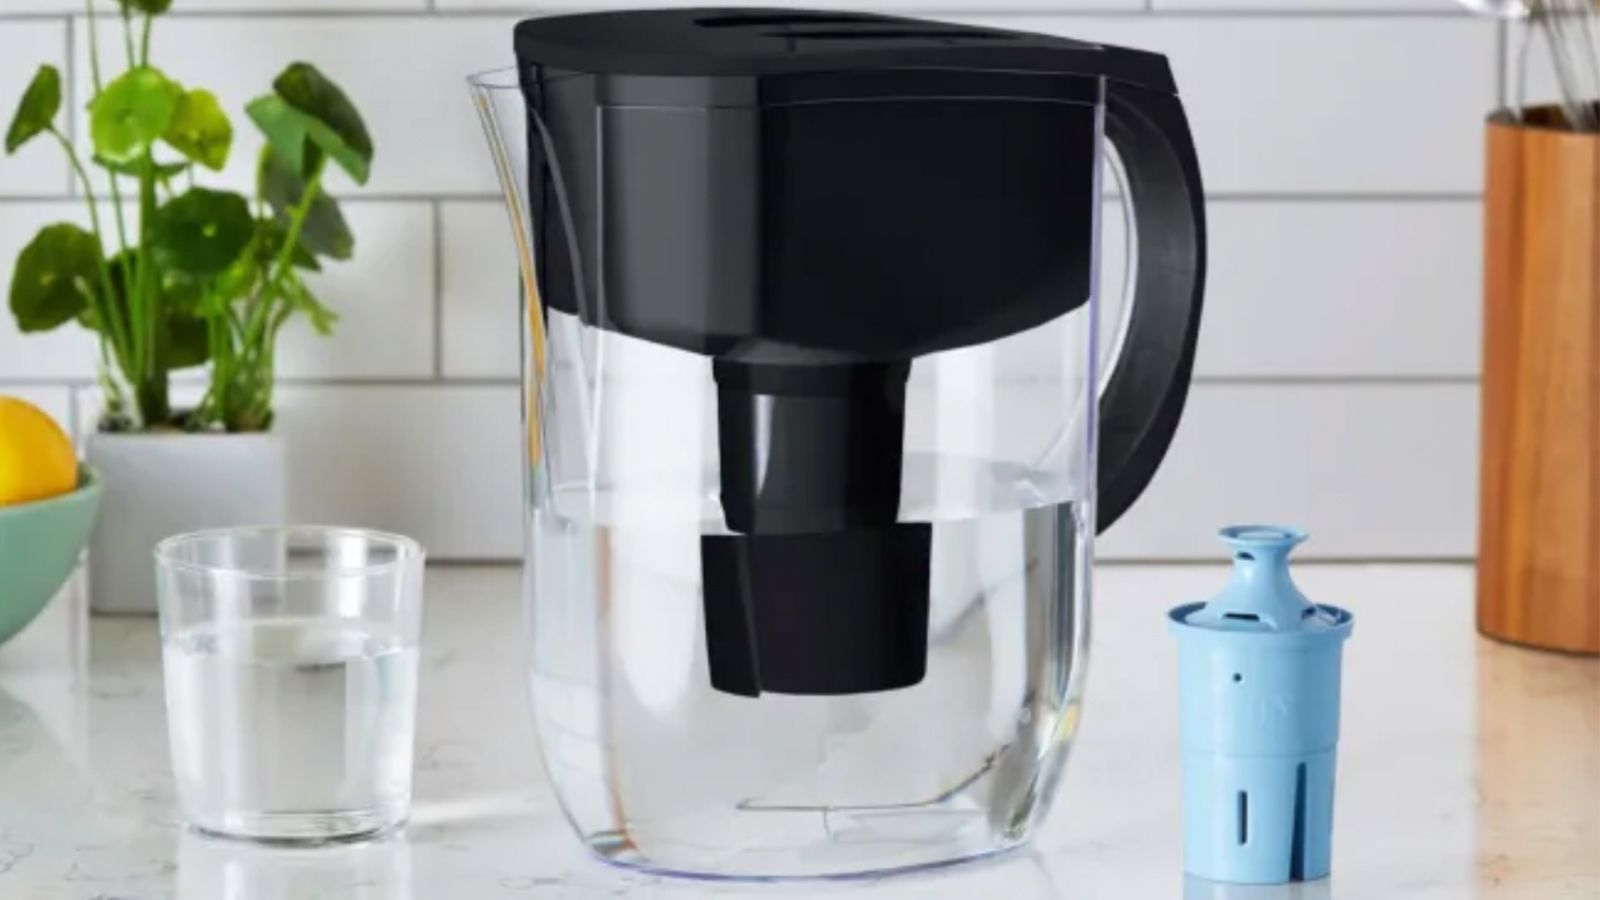 Water Pitcher Filters